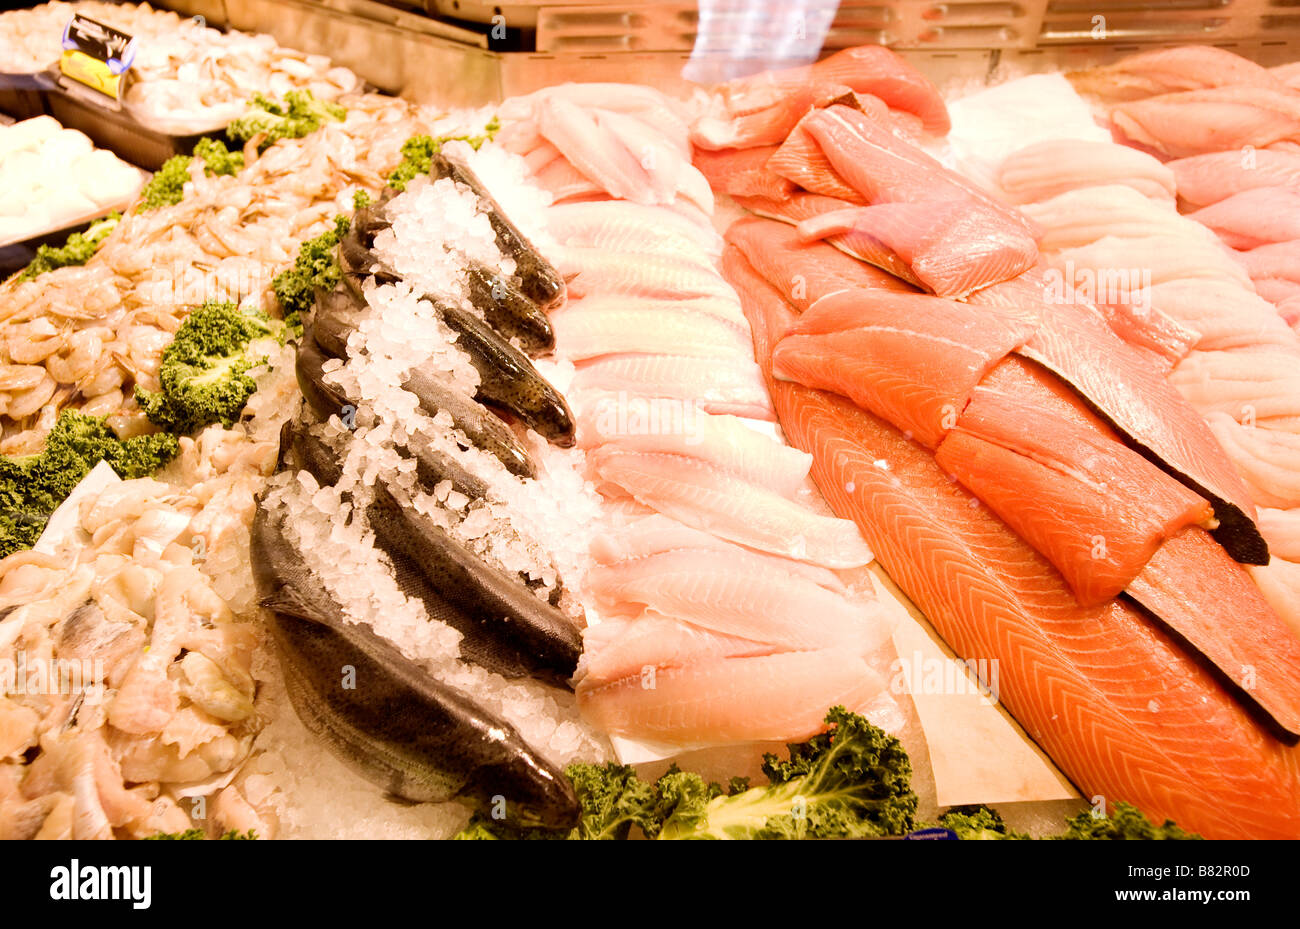 Shrimp trout dover sole salmon petrale sole red snapper on ice in a supermarket display case Stock Photo